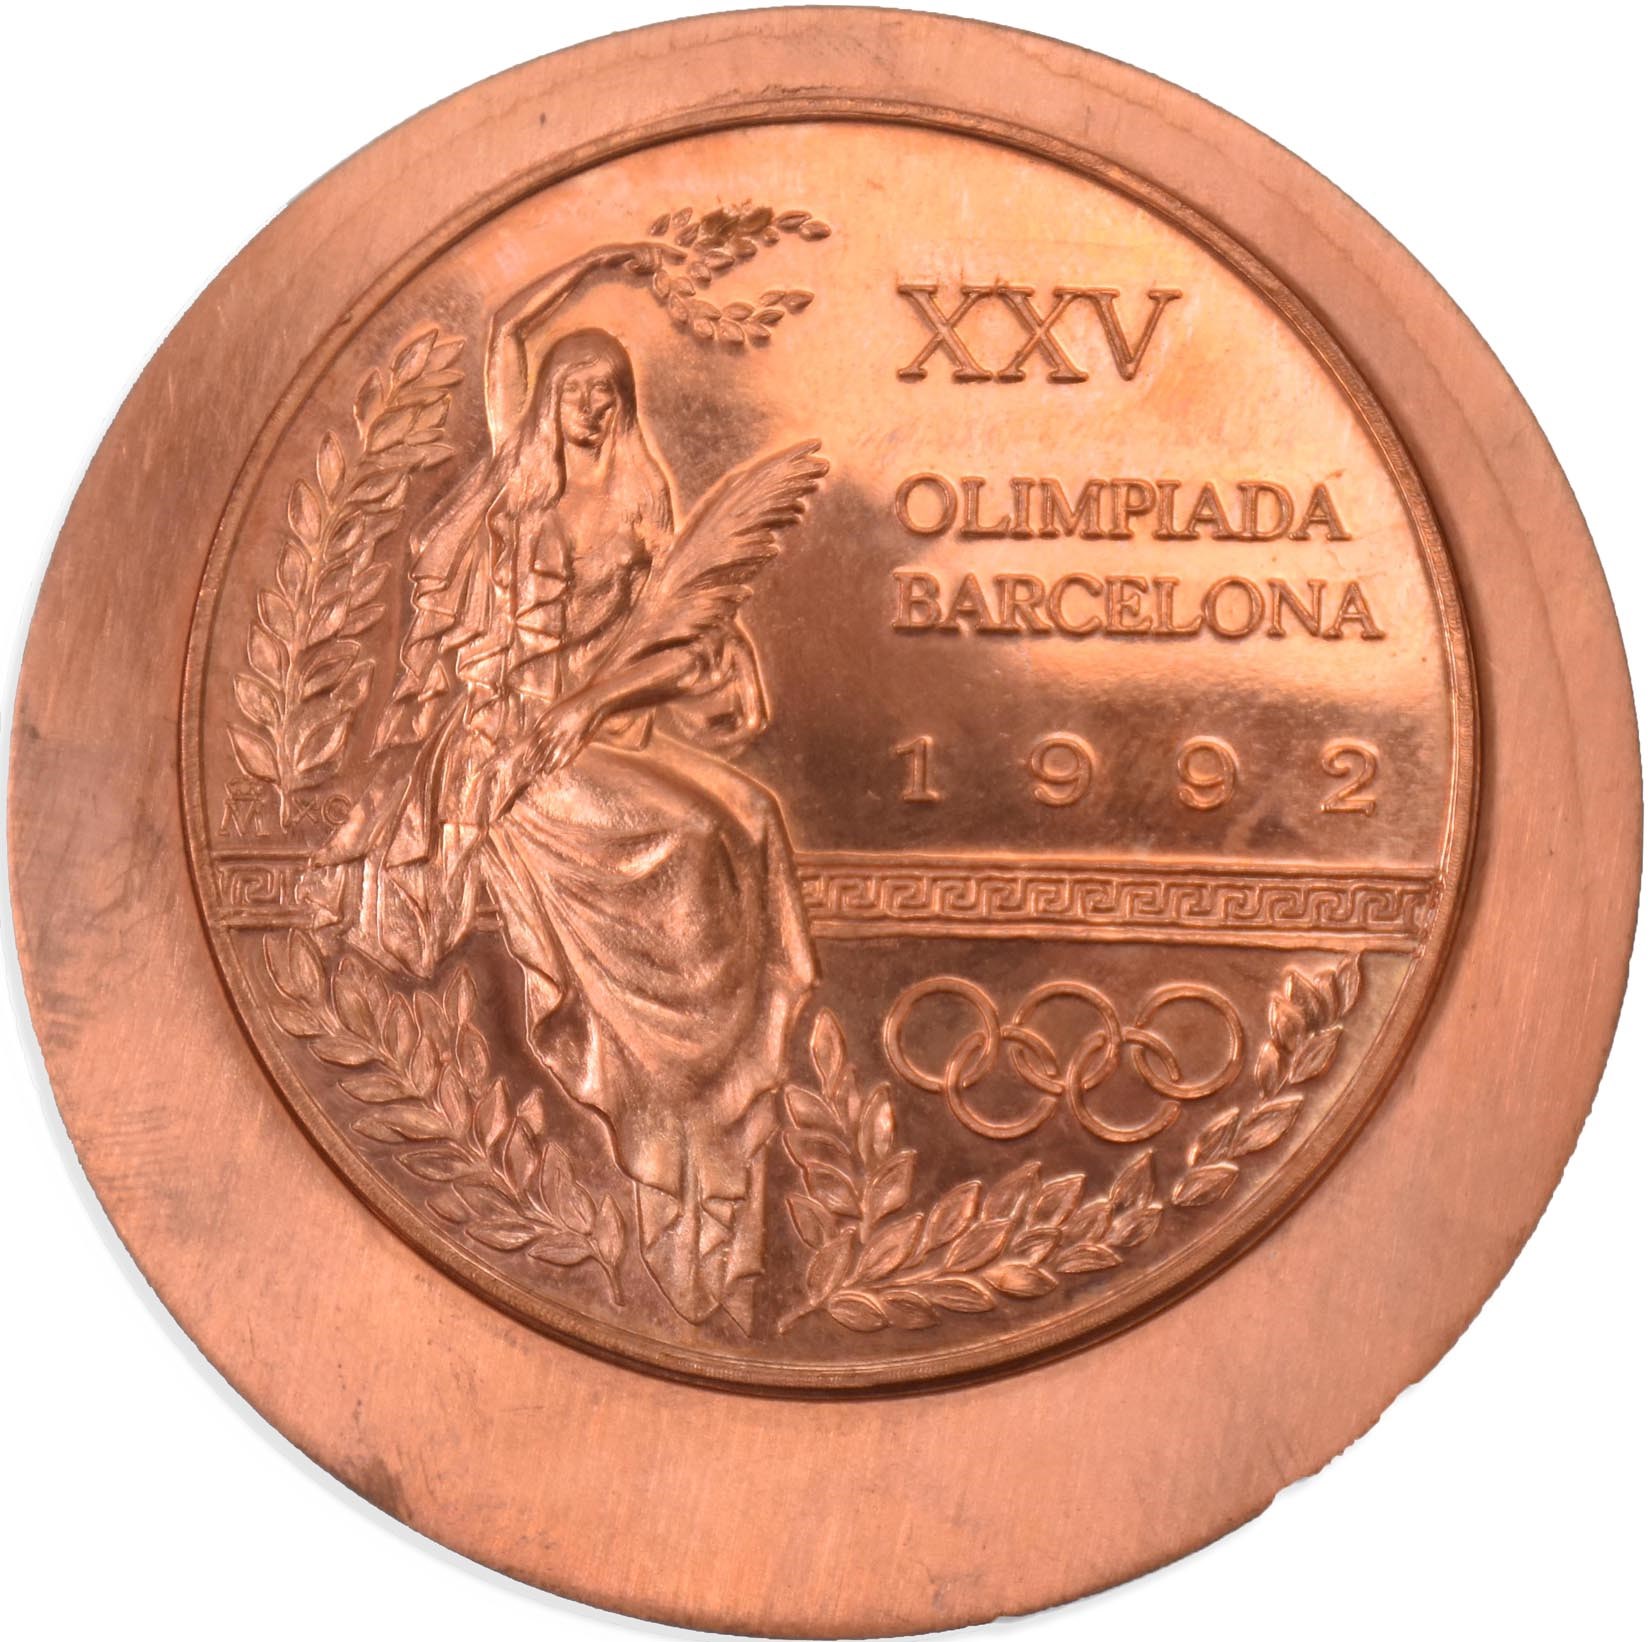 Olympics and All Sports - 1992 Barcelona Summer Olympics Bronze Medal